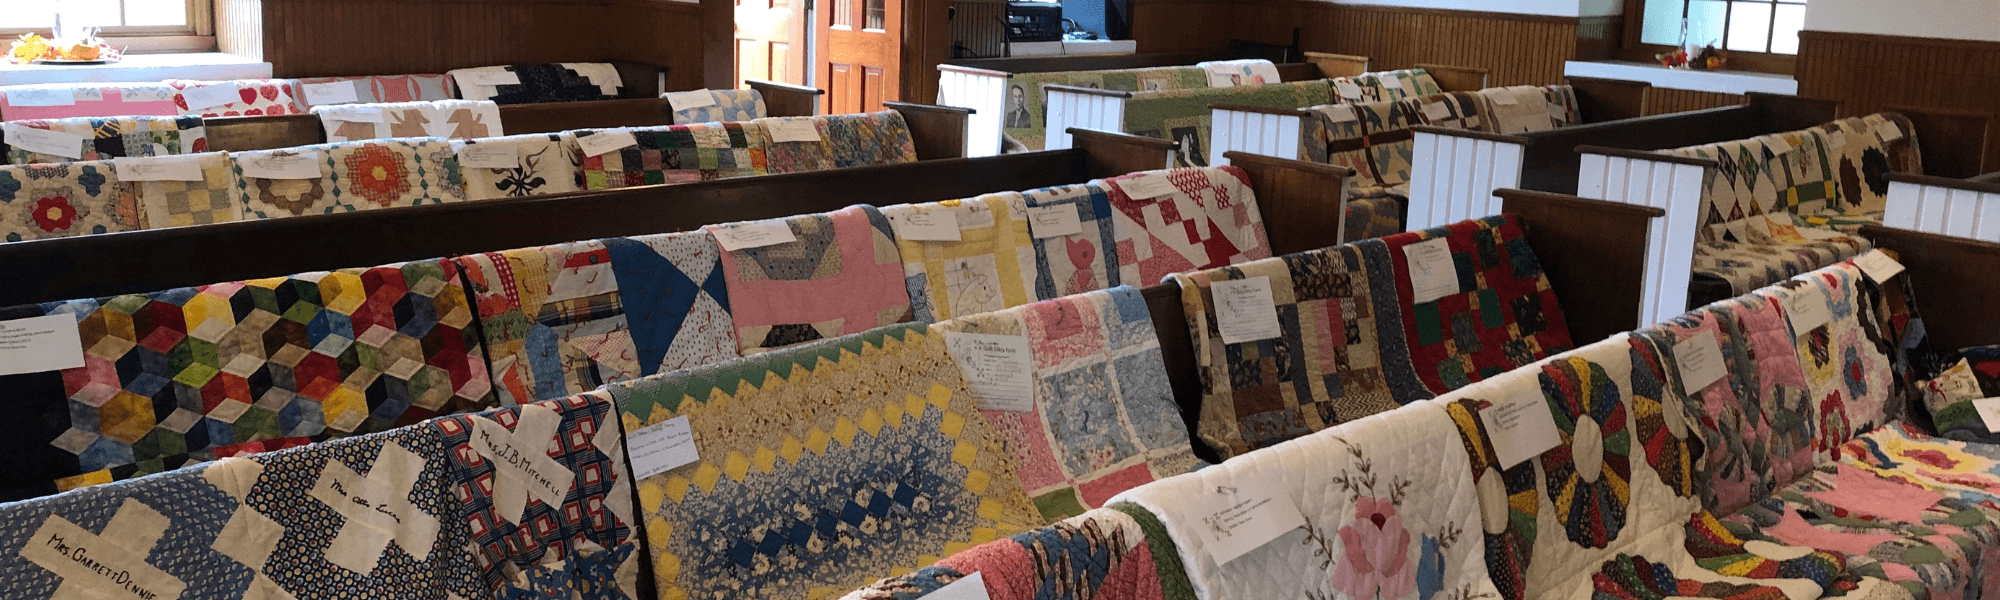 quilts-on-pews-at-beech-church